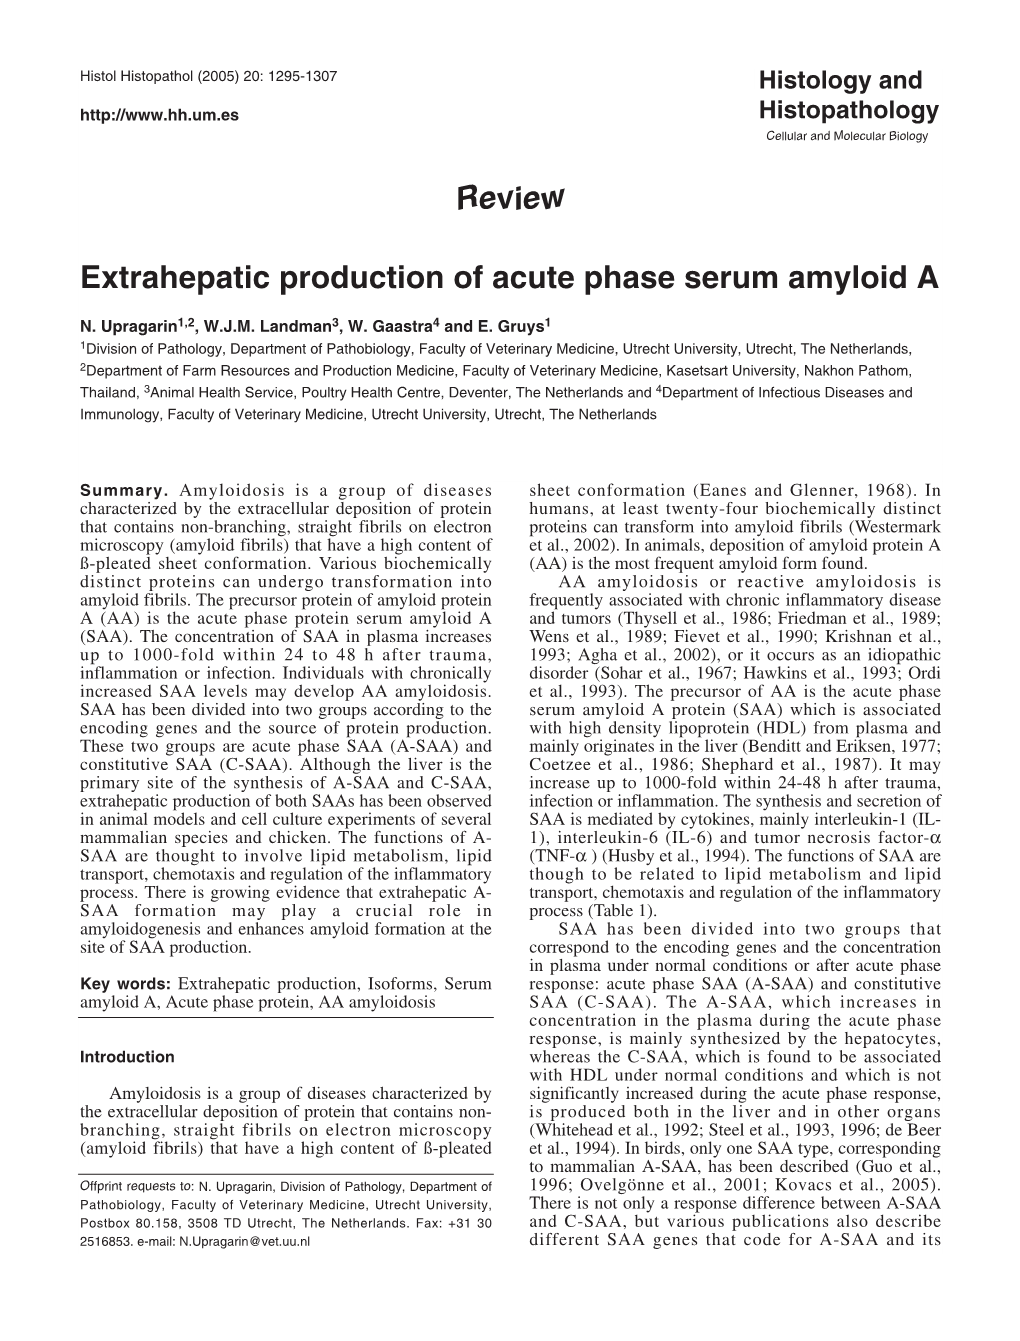 Review Extrahepatic Production of Acute Phase Serum Amyloid A